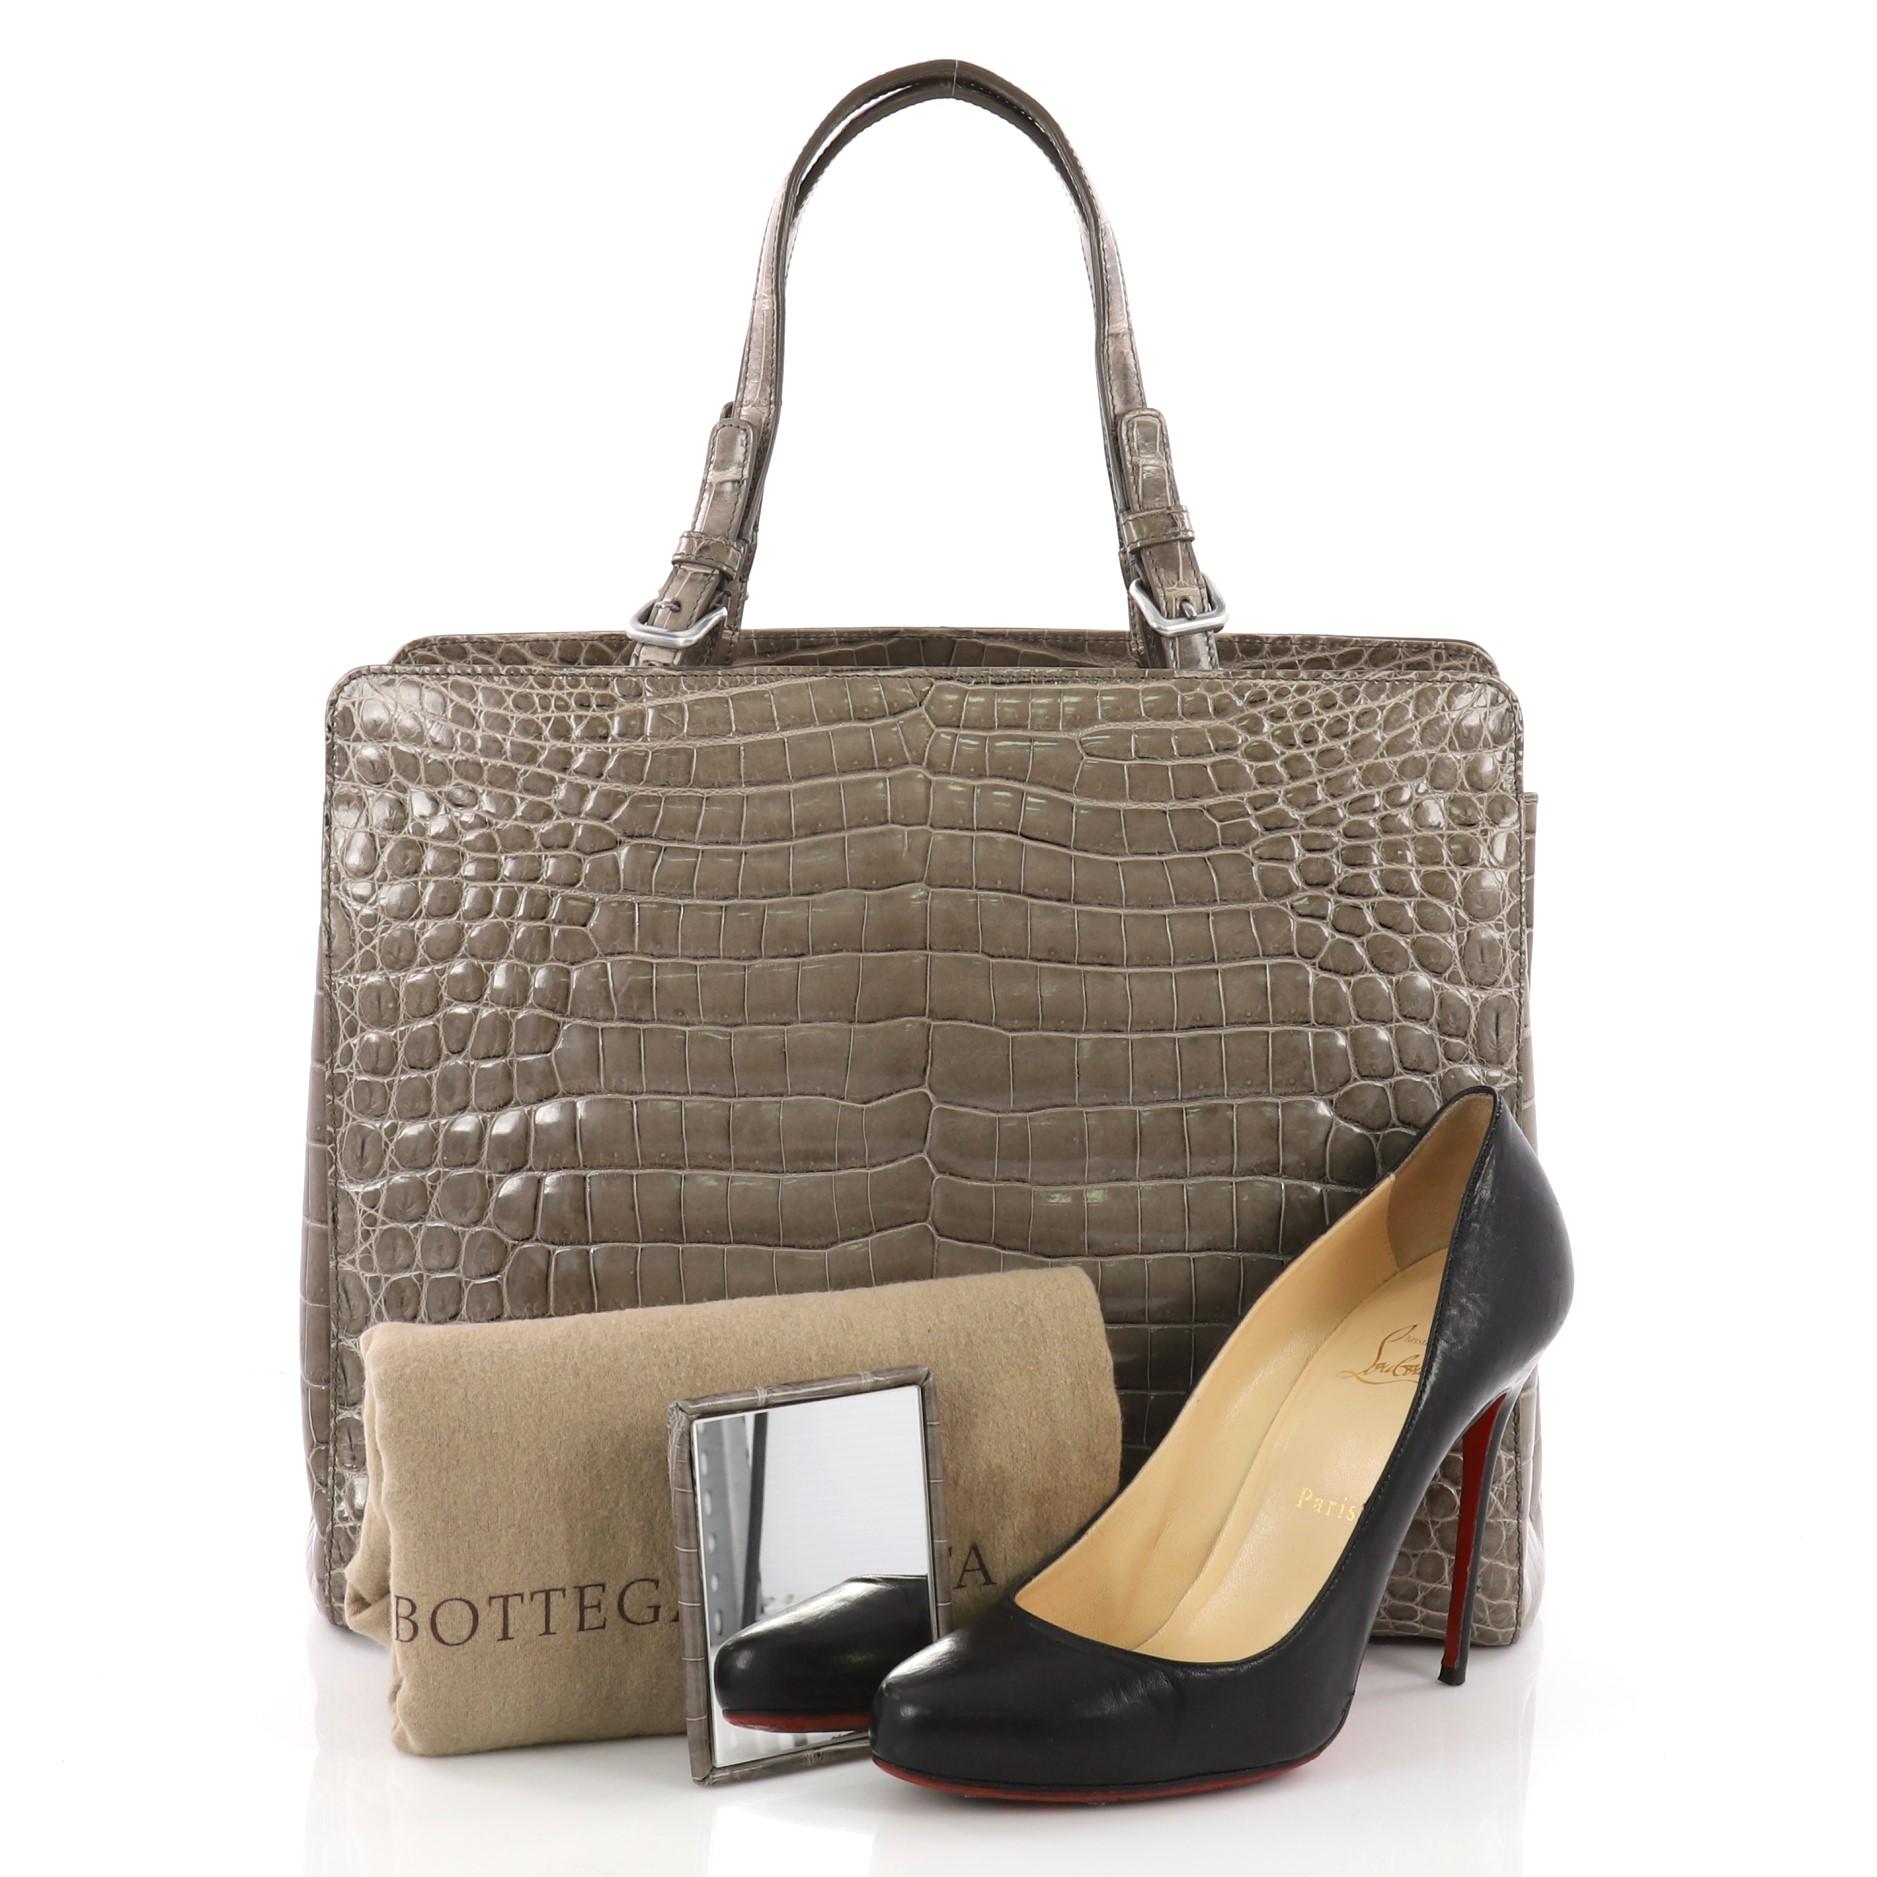 This Bottega Veneta Belted Tote Crocodile Medium. crafted from genuine taupe crocodile, features dual crocodile handles with belt and buckle accents and gunmetal-tone hardware. It opens to a taupe leather interior divided into two compartments with